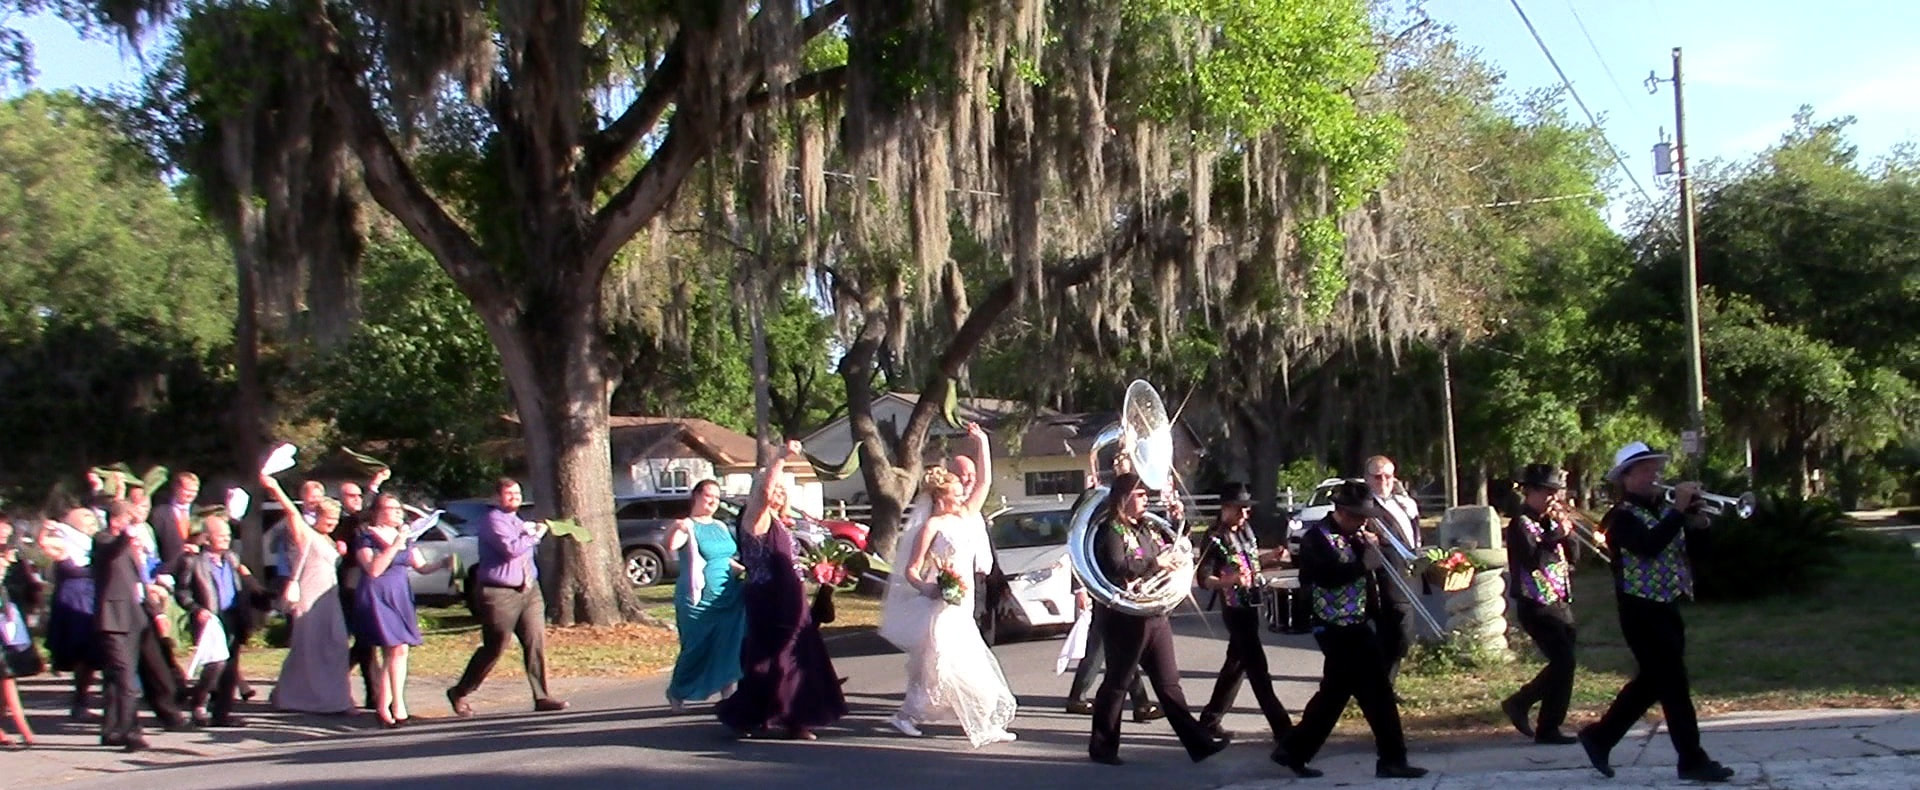 The Real Deal Brass Band performing for a second line wedding parade available in Jacksonville, Amelia Island, Palm Coast, Ponte Vedra Beach and Palm Coast Florida. 